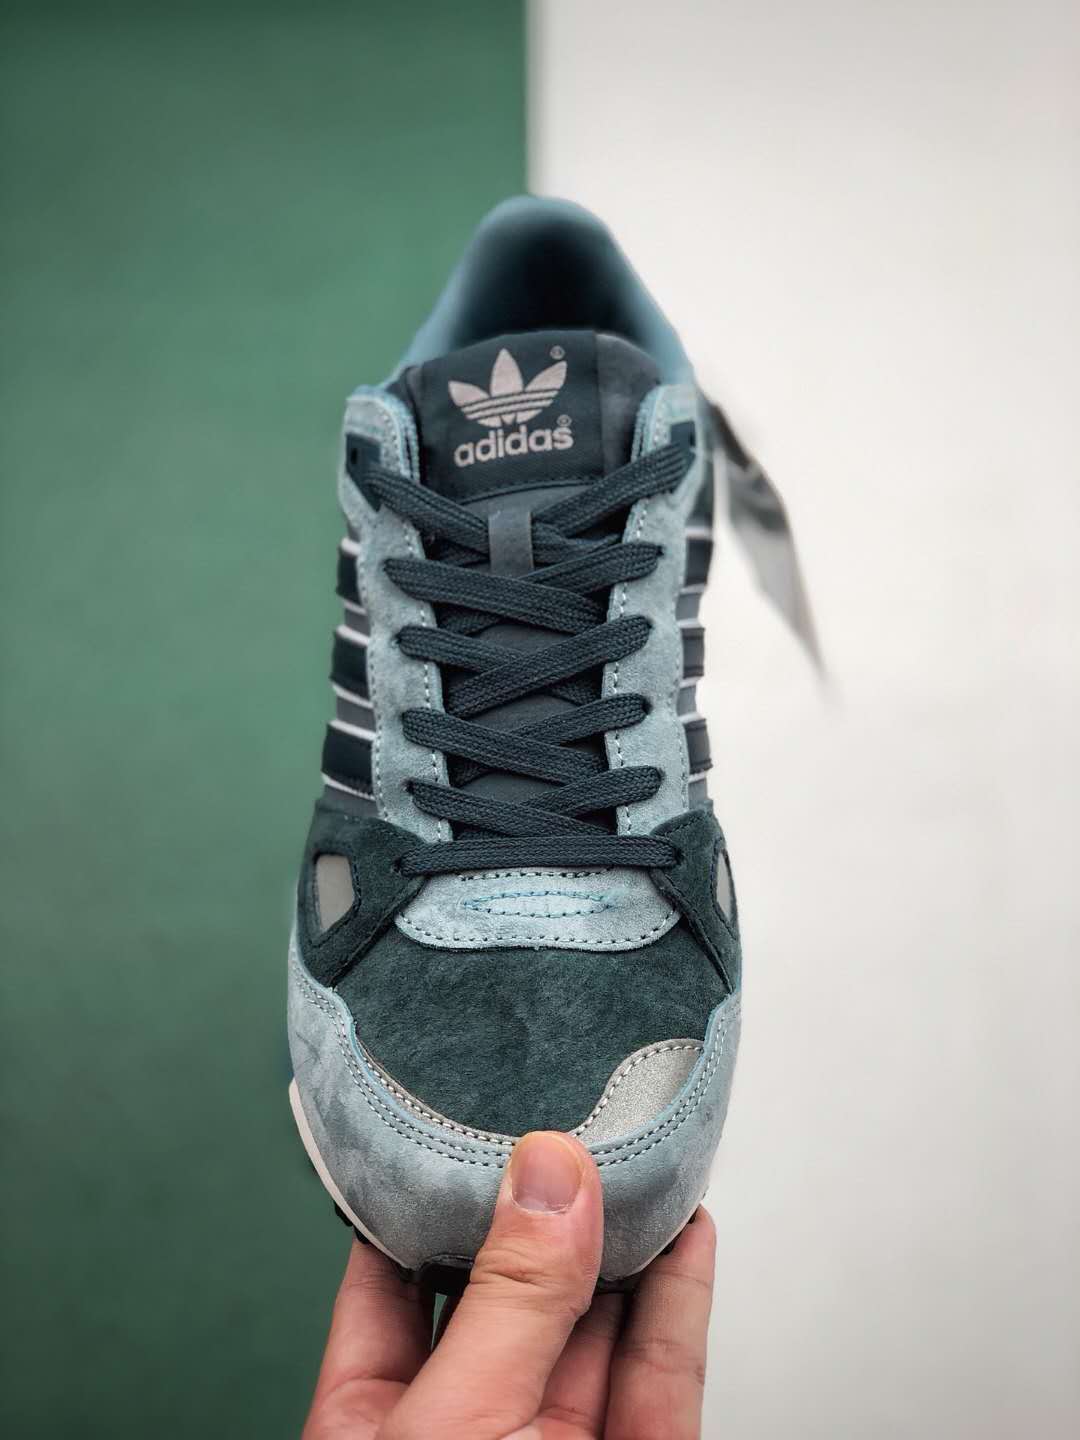 Adidas Originals ZX 750 Dark Petrol M18258 - Shop Now and Elevate Your Style!